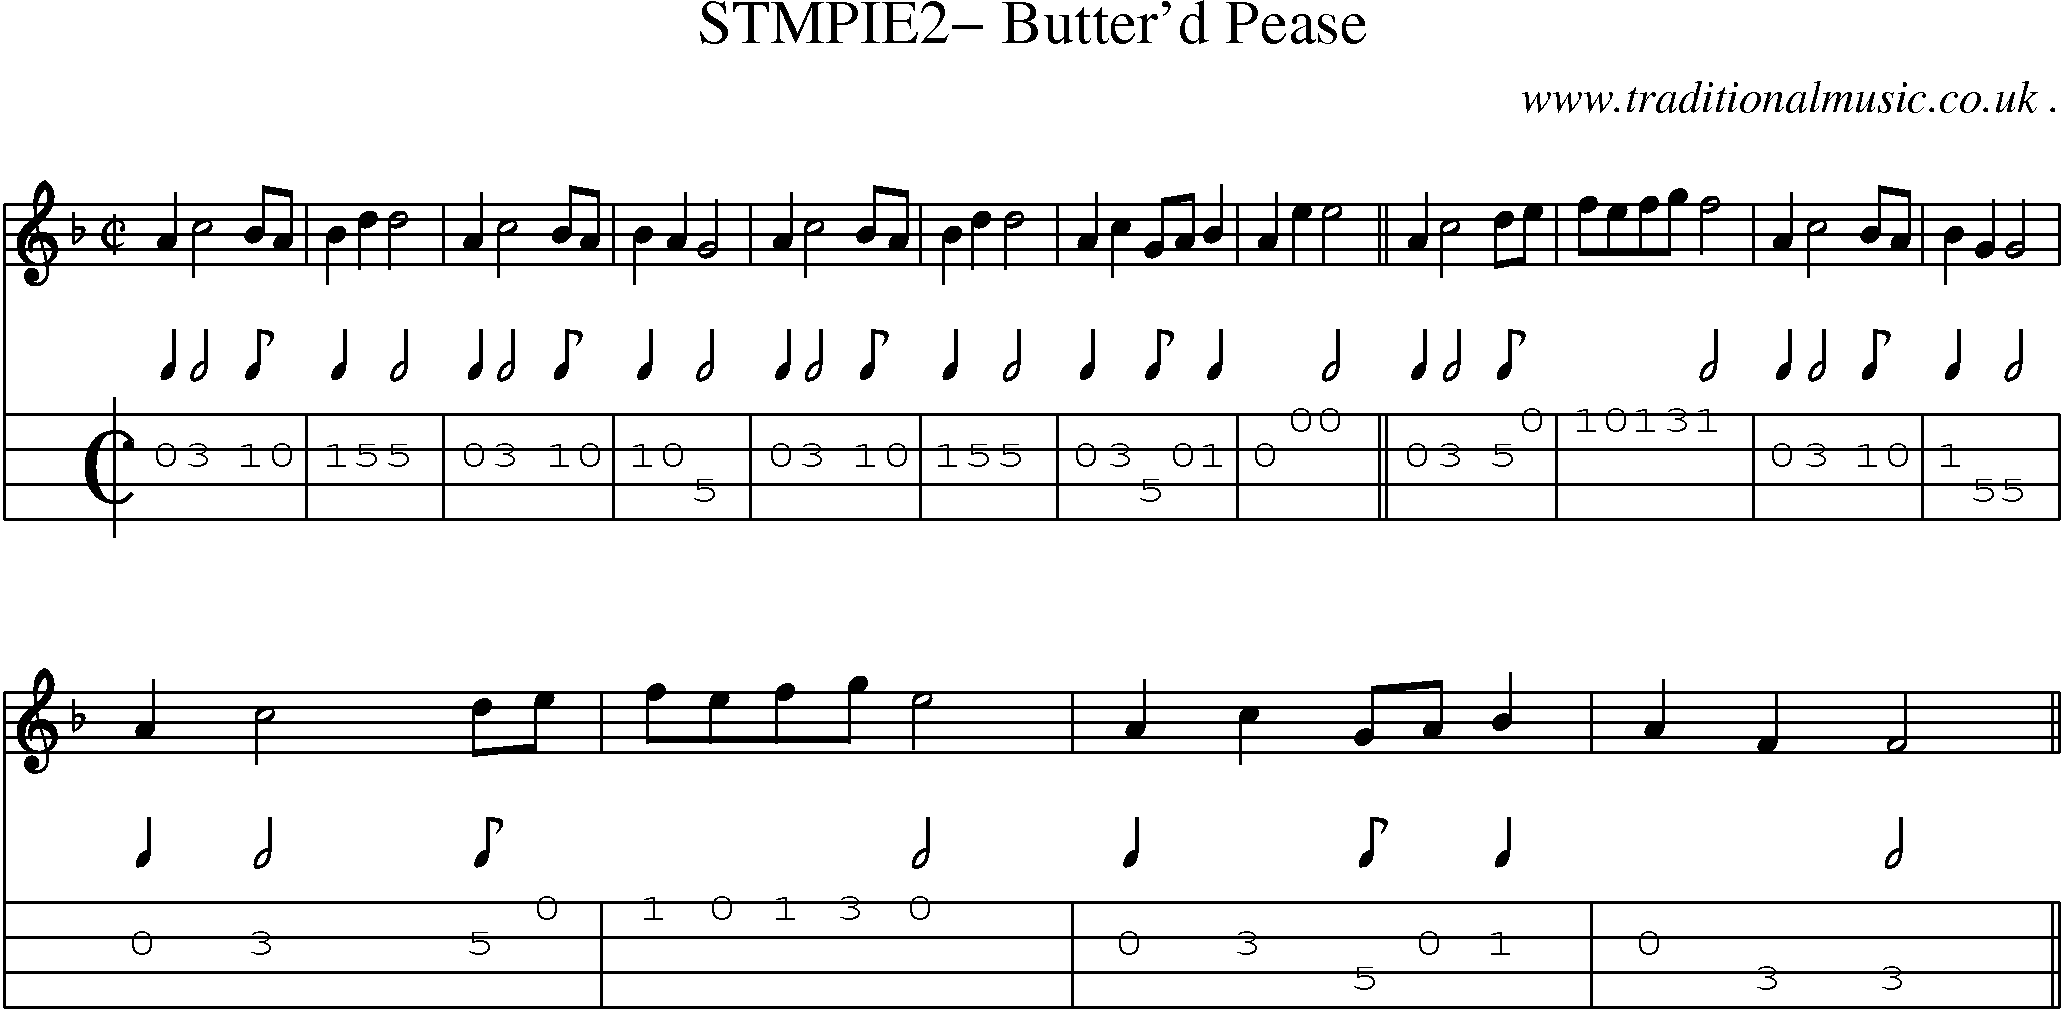 Sheet-Music and Mandolin Tabs for Stmpie2 Butterd Pease